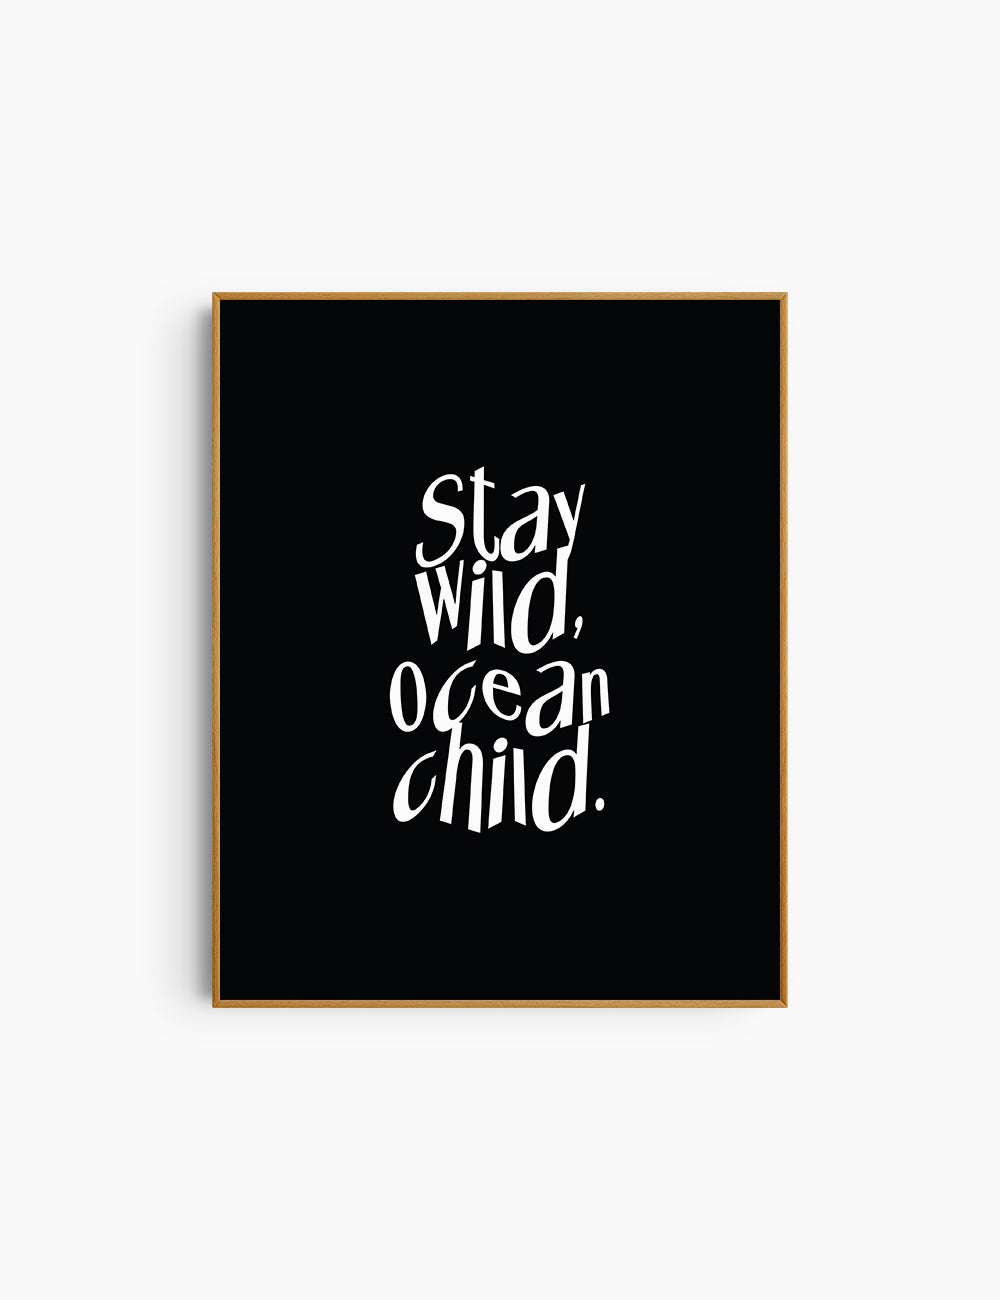 STAY WILD, OCEAN CHILD. Black and White. Printable Wall Art Quote.